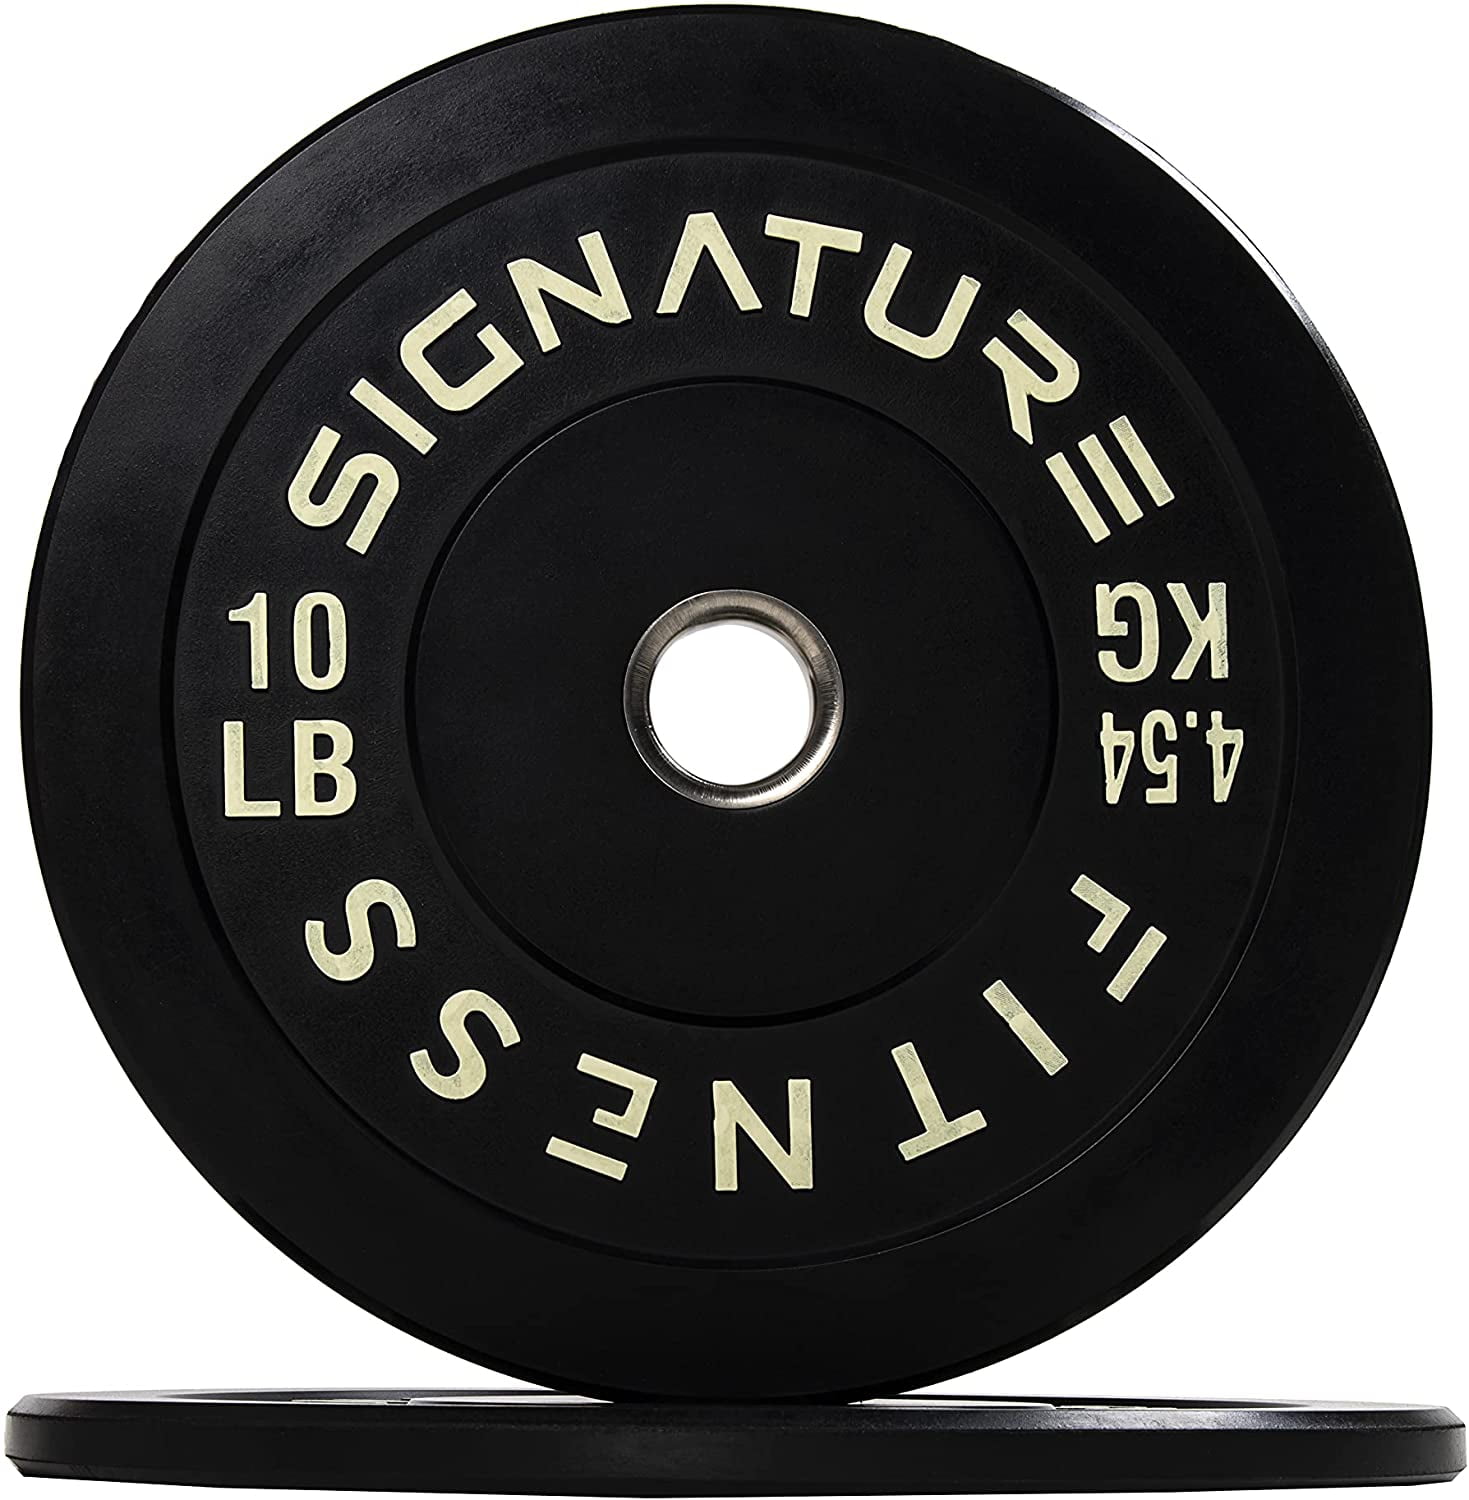 Signature Fitness 2 Olympic Bumper Plate Weight Plates with Steel Hub in Pairs or Sets 100% Virgin Rubber 